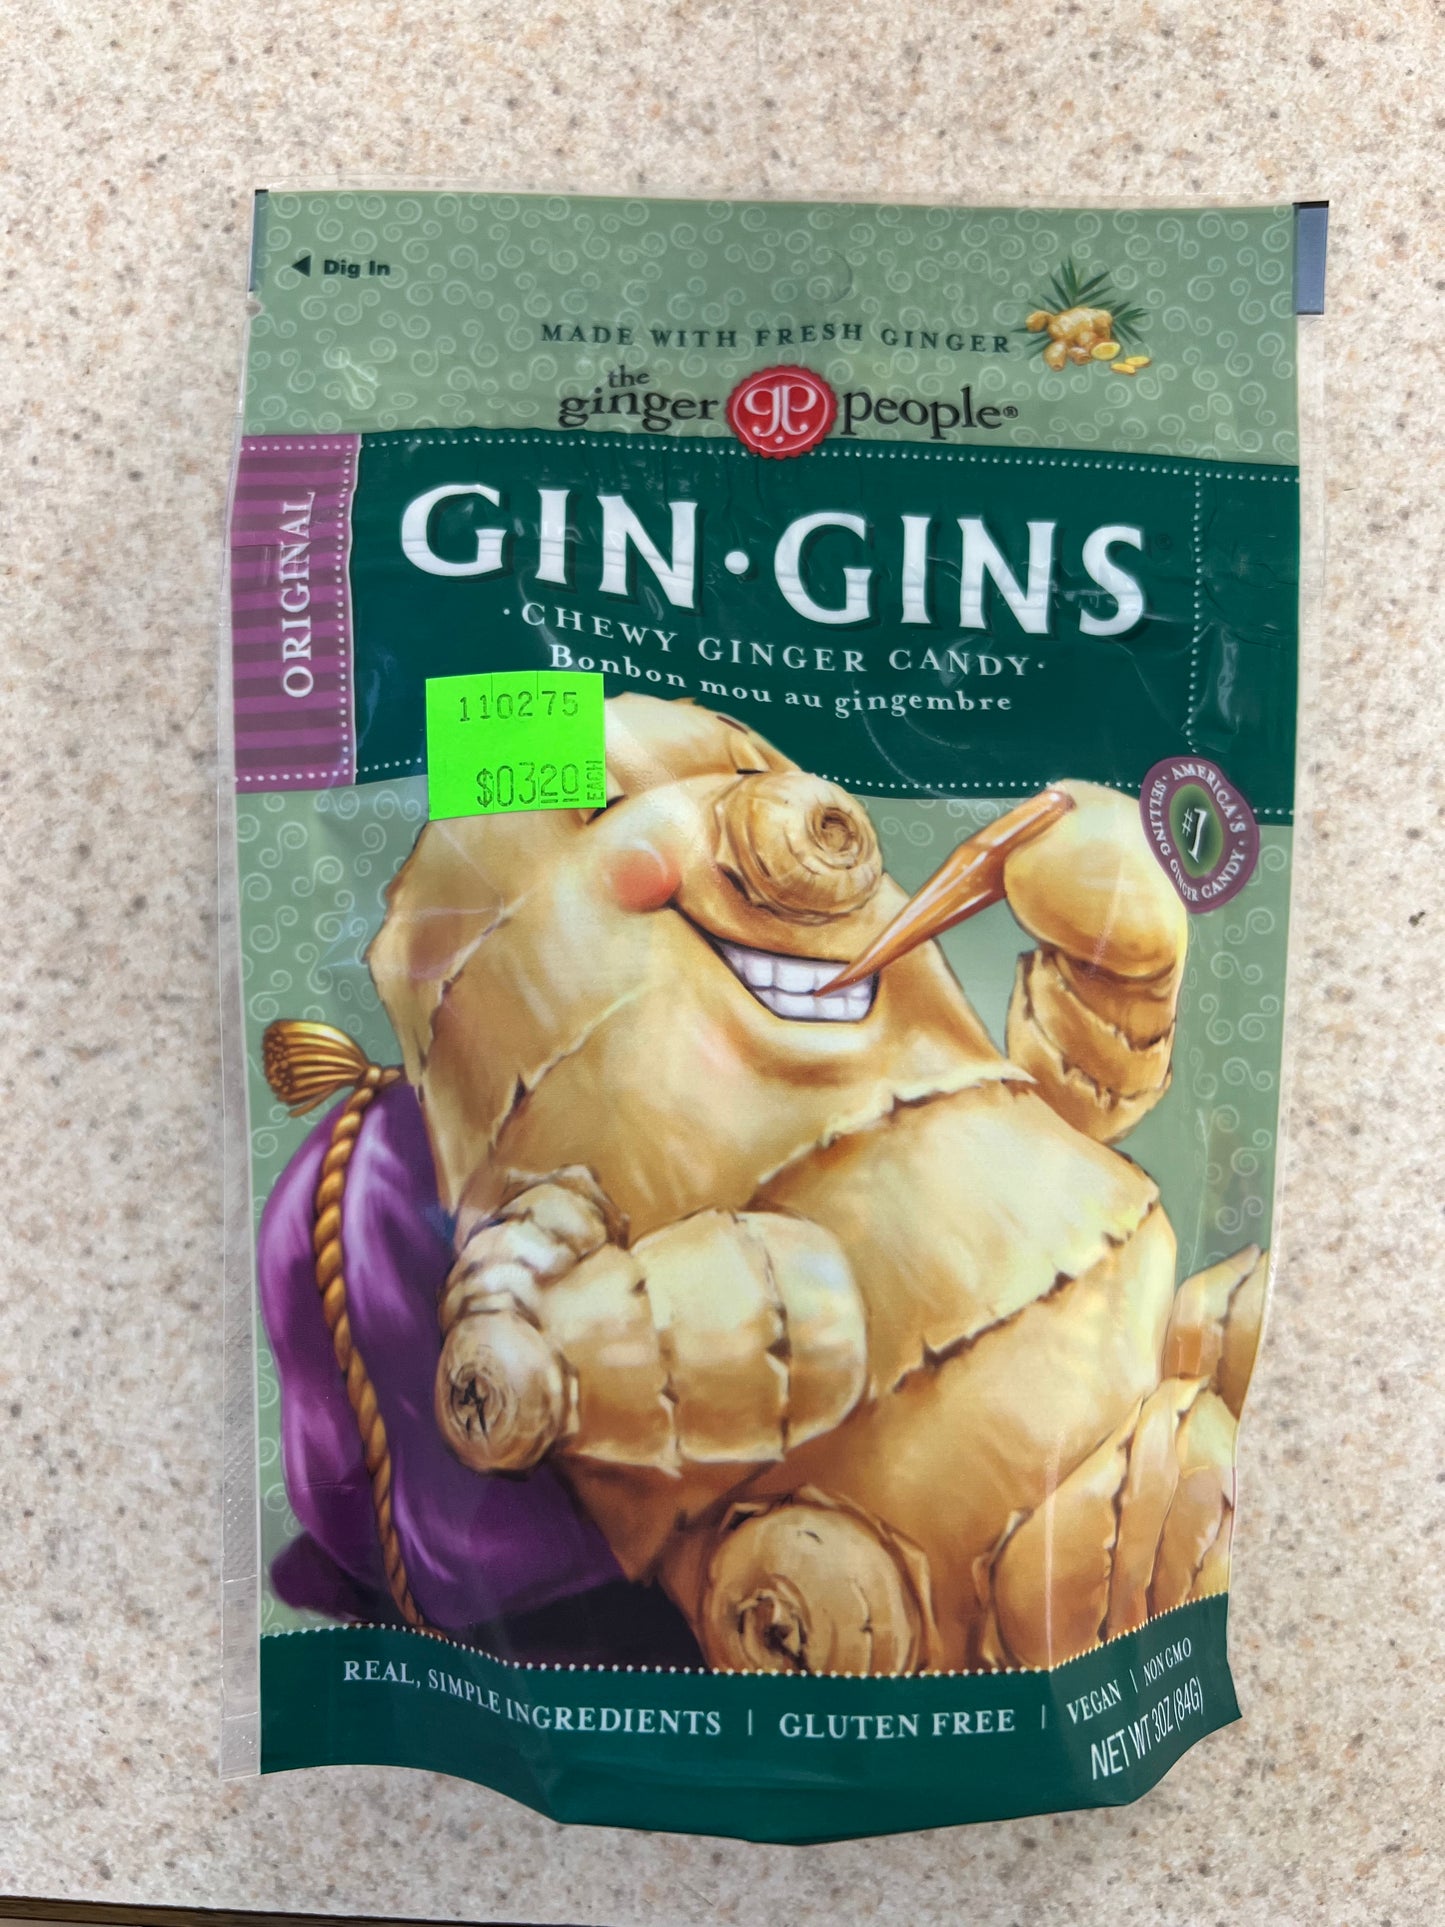 Gin Gins Chewy Ginger Candy Bag